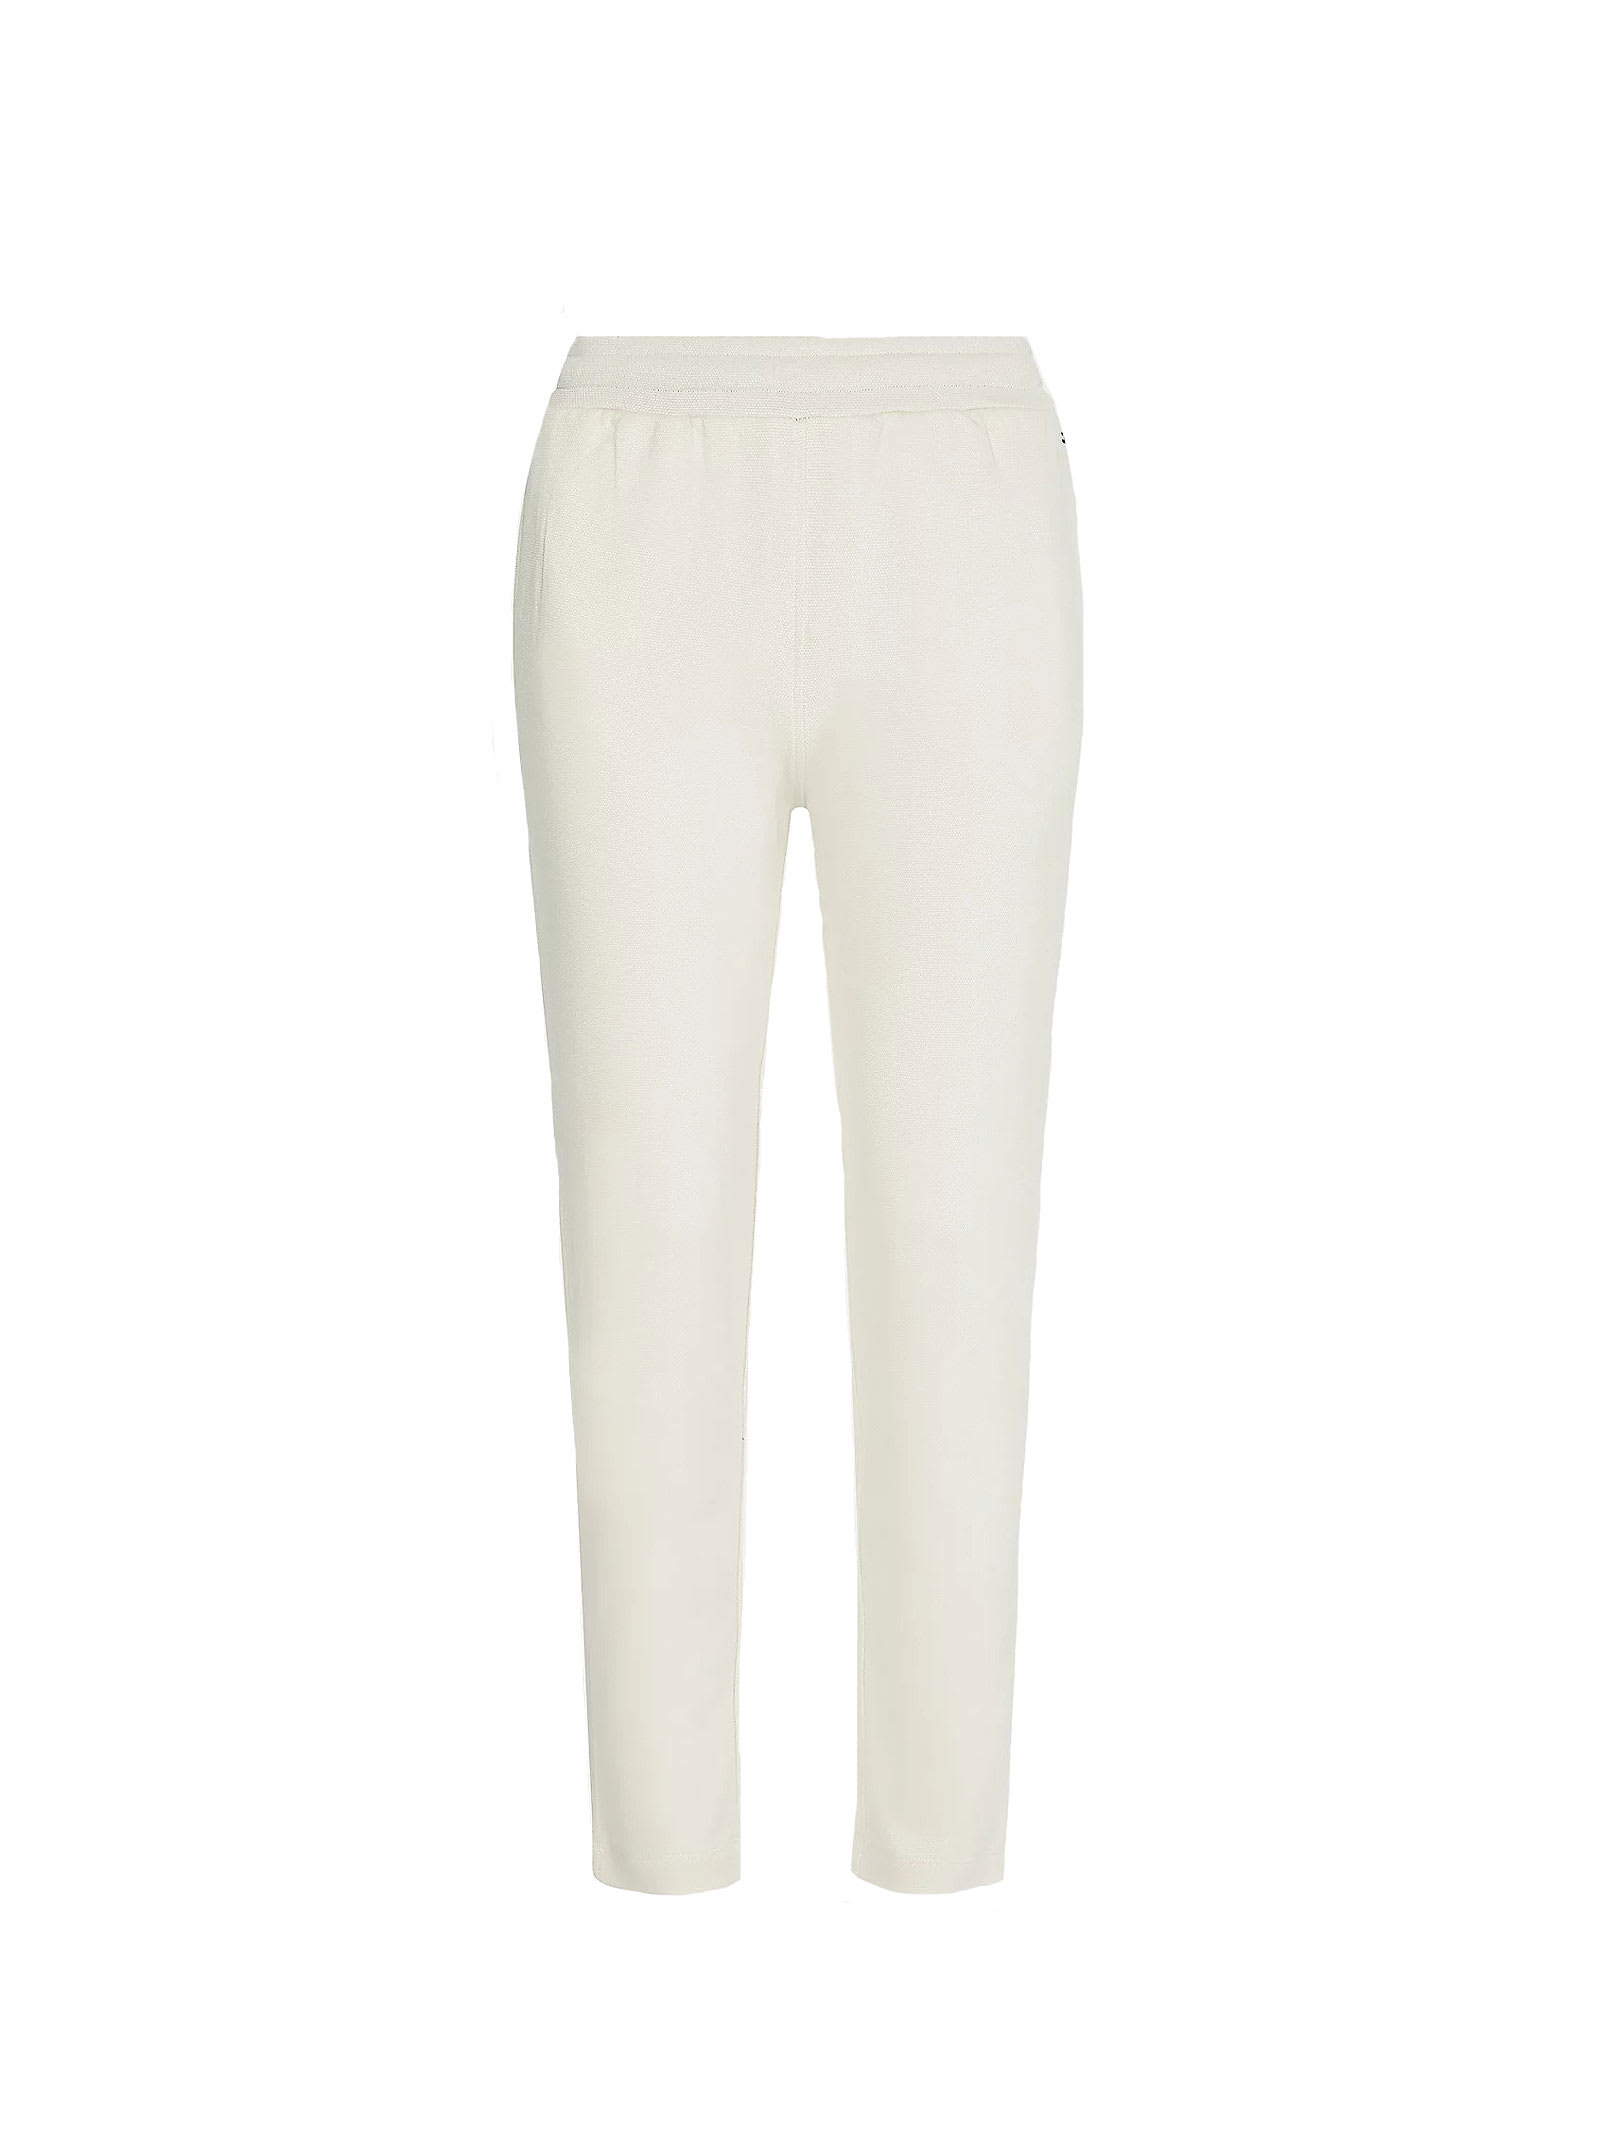 Tommy Hilfiger Trousers In White Cream Colored